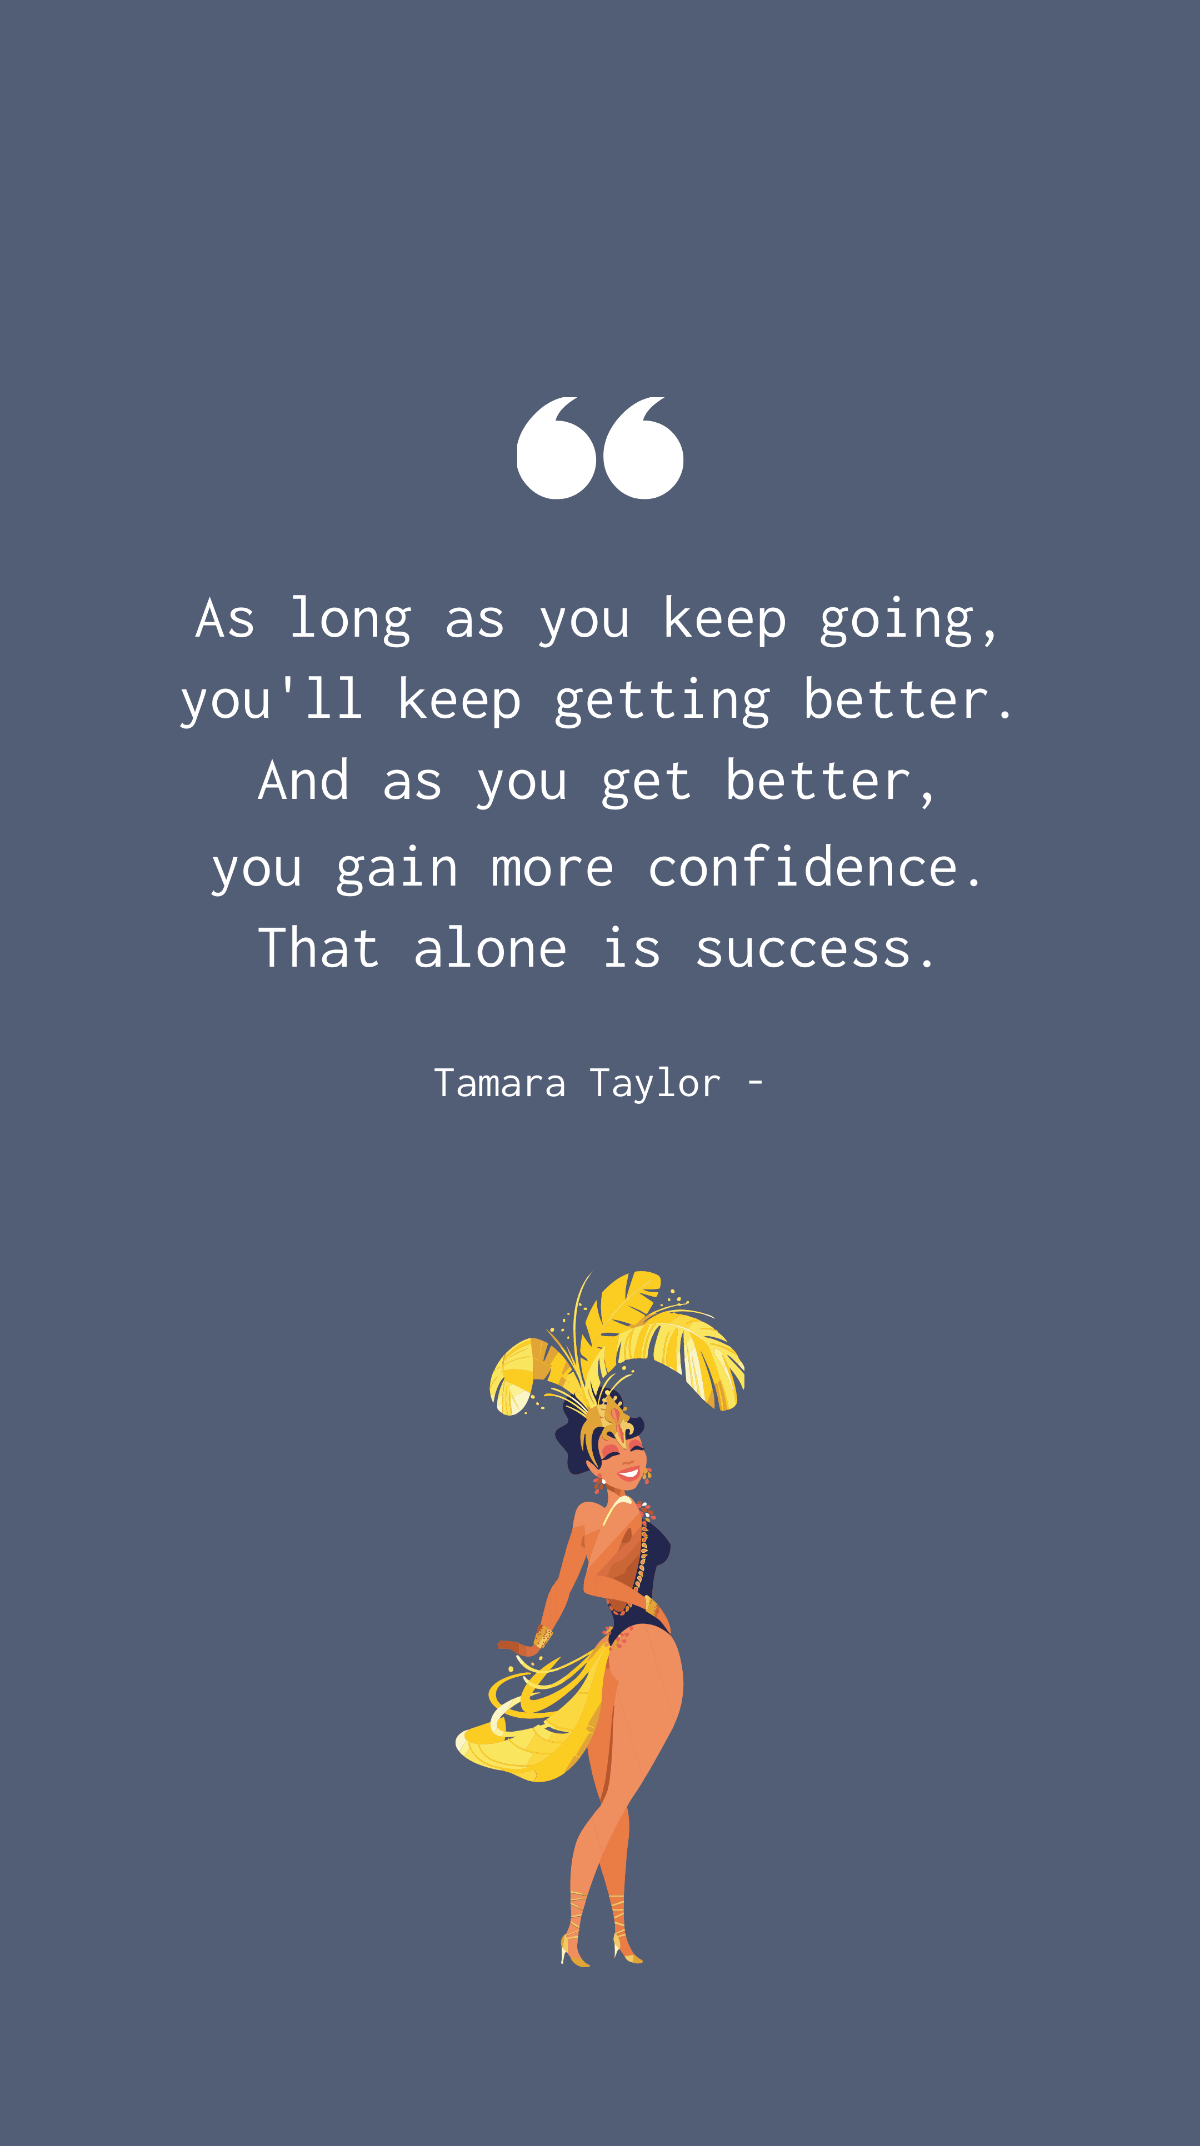 Tamara Taylor - As long as you keep going, you'll keep getting better. And as you get better, you gain more confidence. That alone is success.